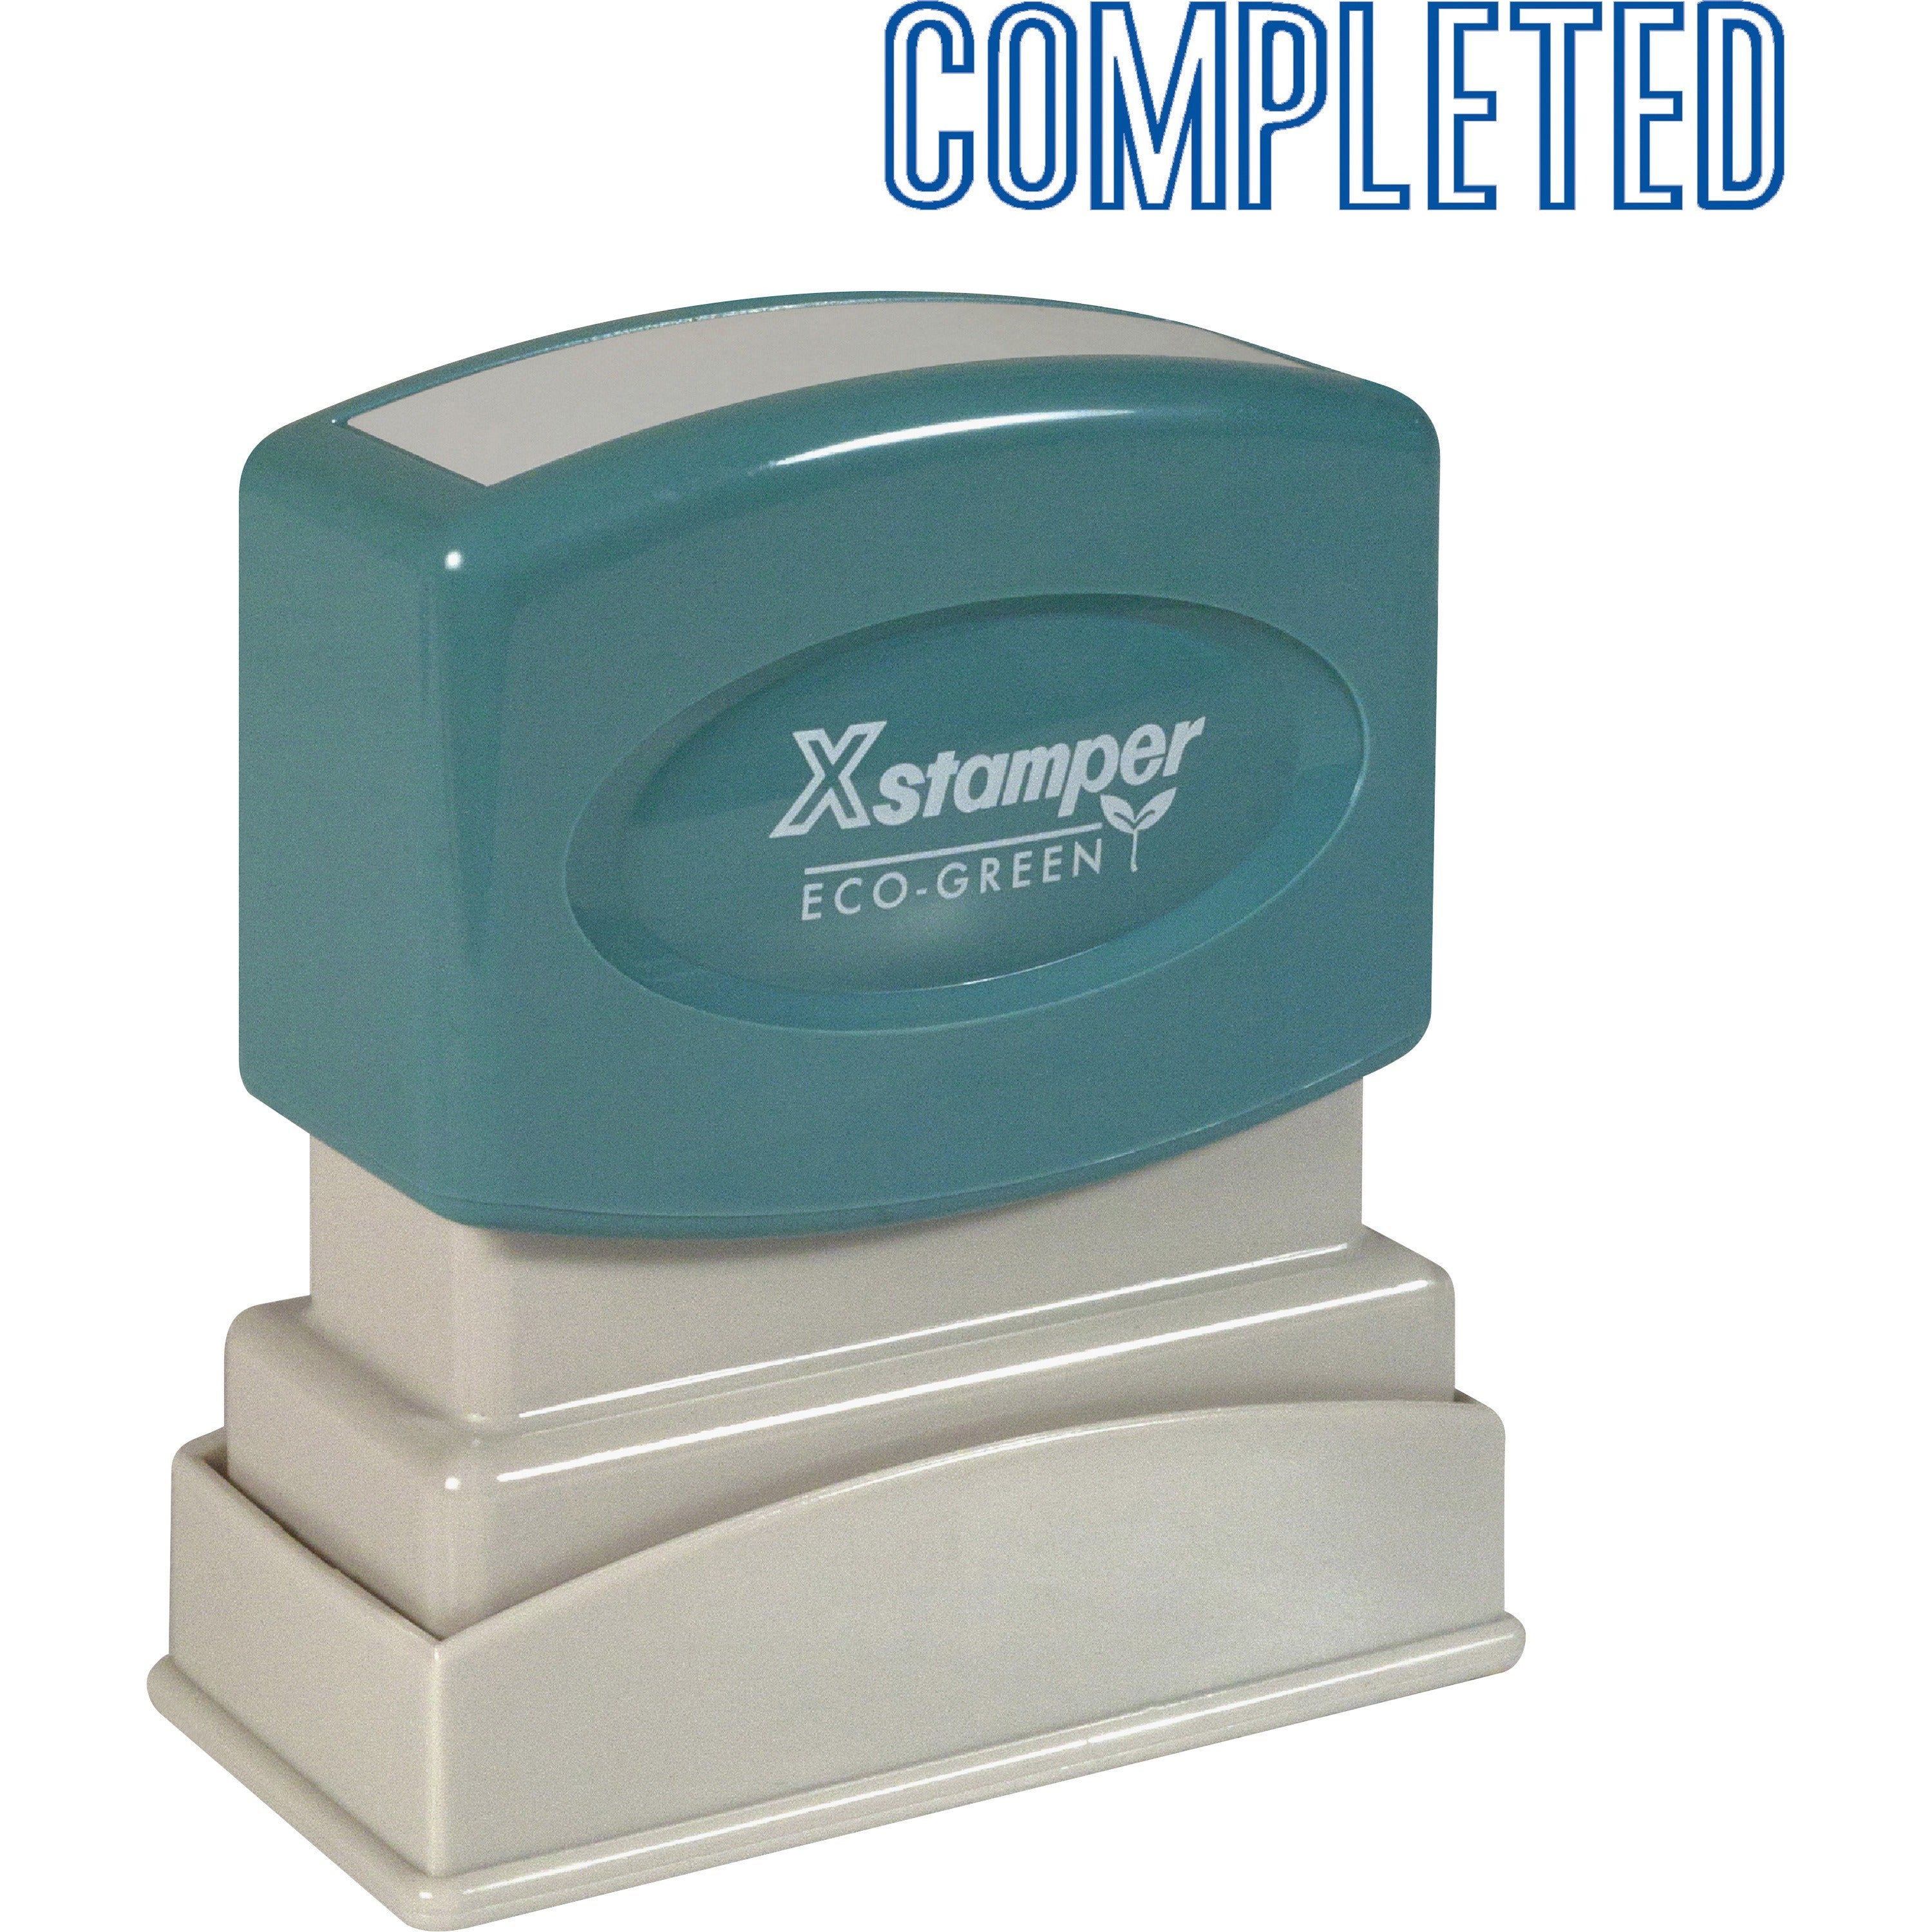 Xstamper COMPLETED Title Stamp - Message Stamp - "COMPLETED" - 0.50" Impression Width x 1.63" Impression Length - 100000 Impression(s) - Blue - Recycled - 1 Each - 